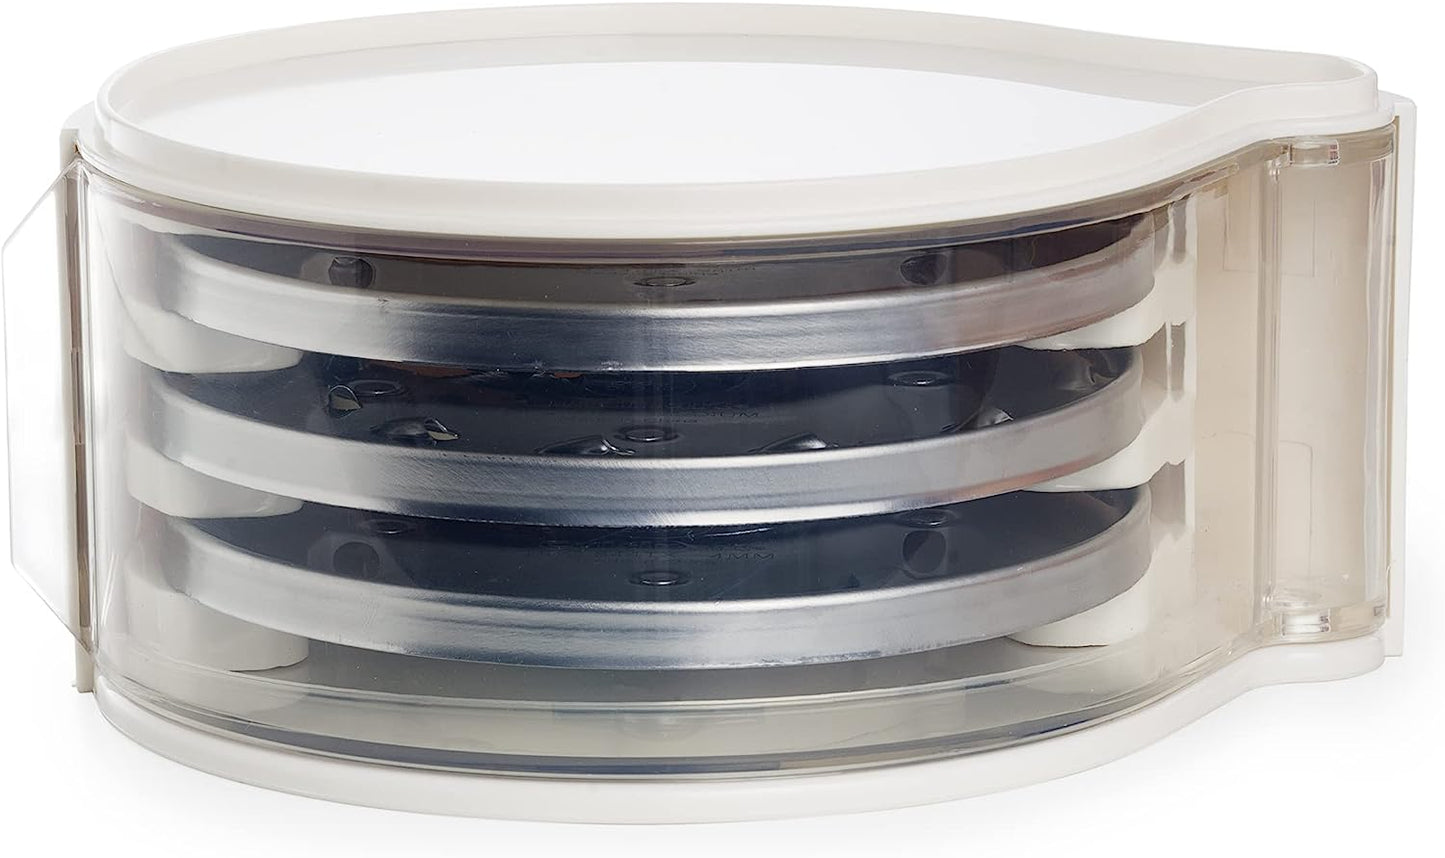 Cutting Blade Disc Holder for Cuisinart Food Processors DLC-DH